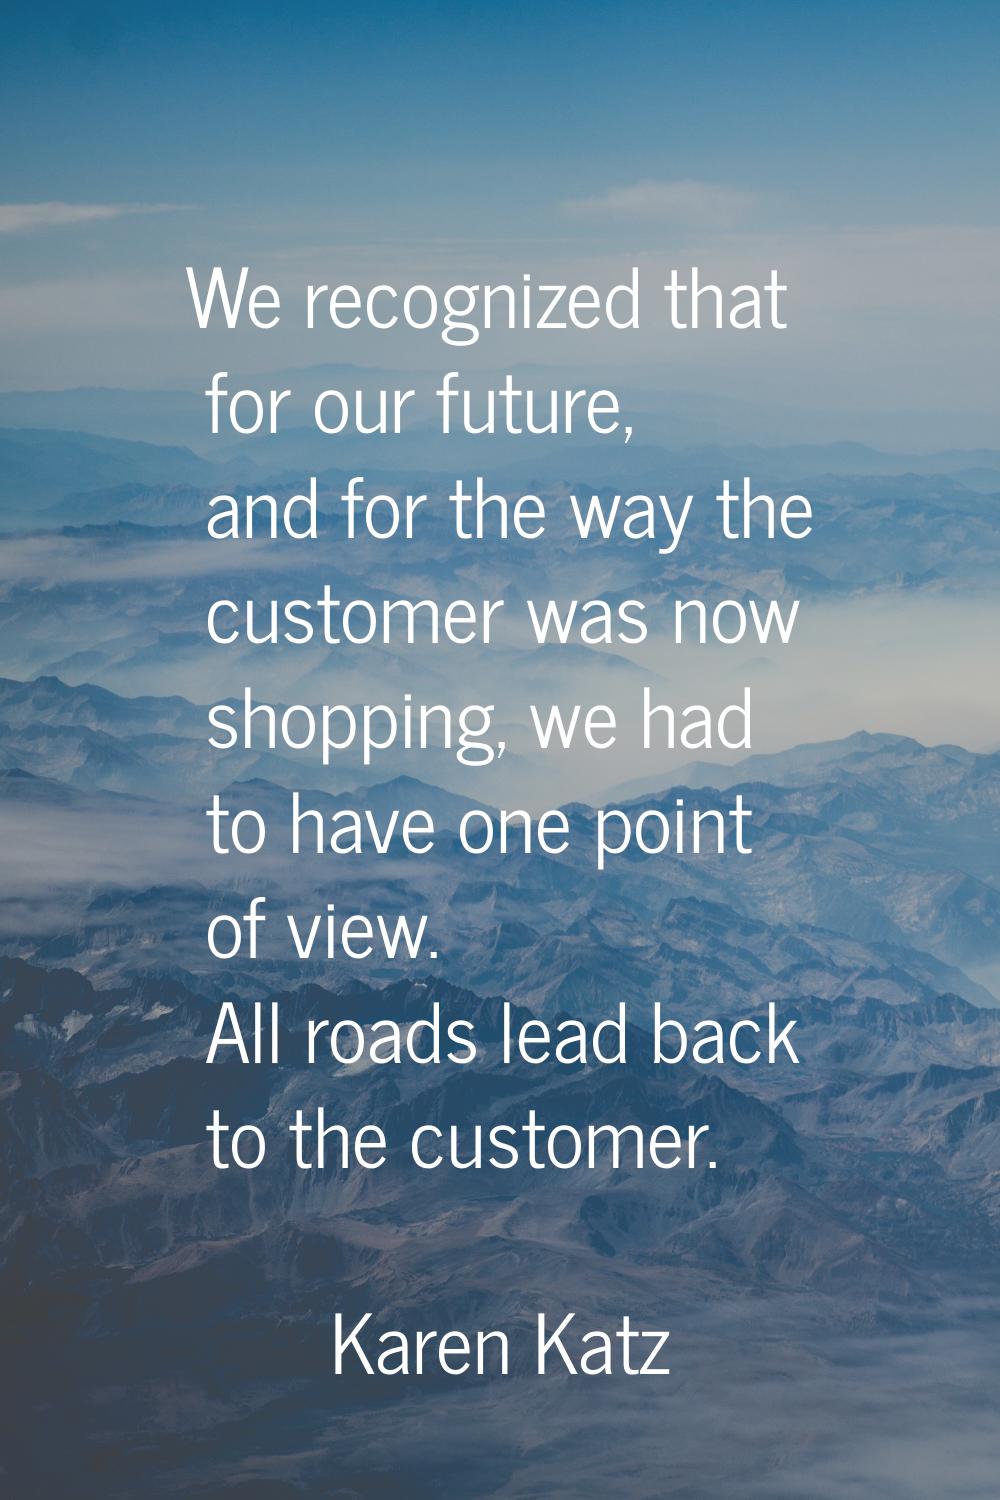 We recognized that for our future, and for the way the customer was now shopping, we had to have on